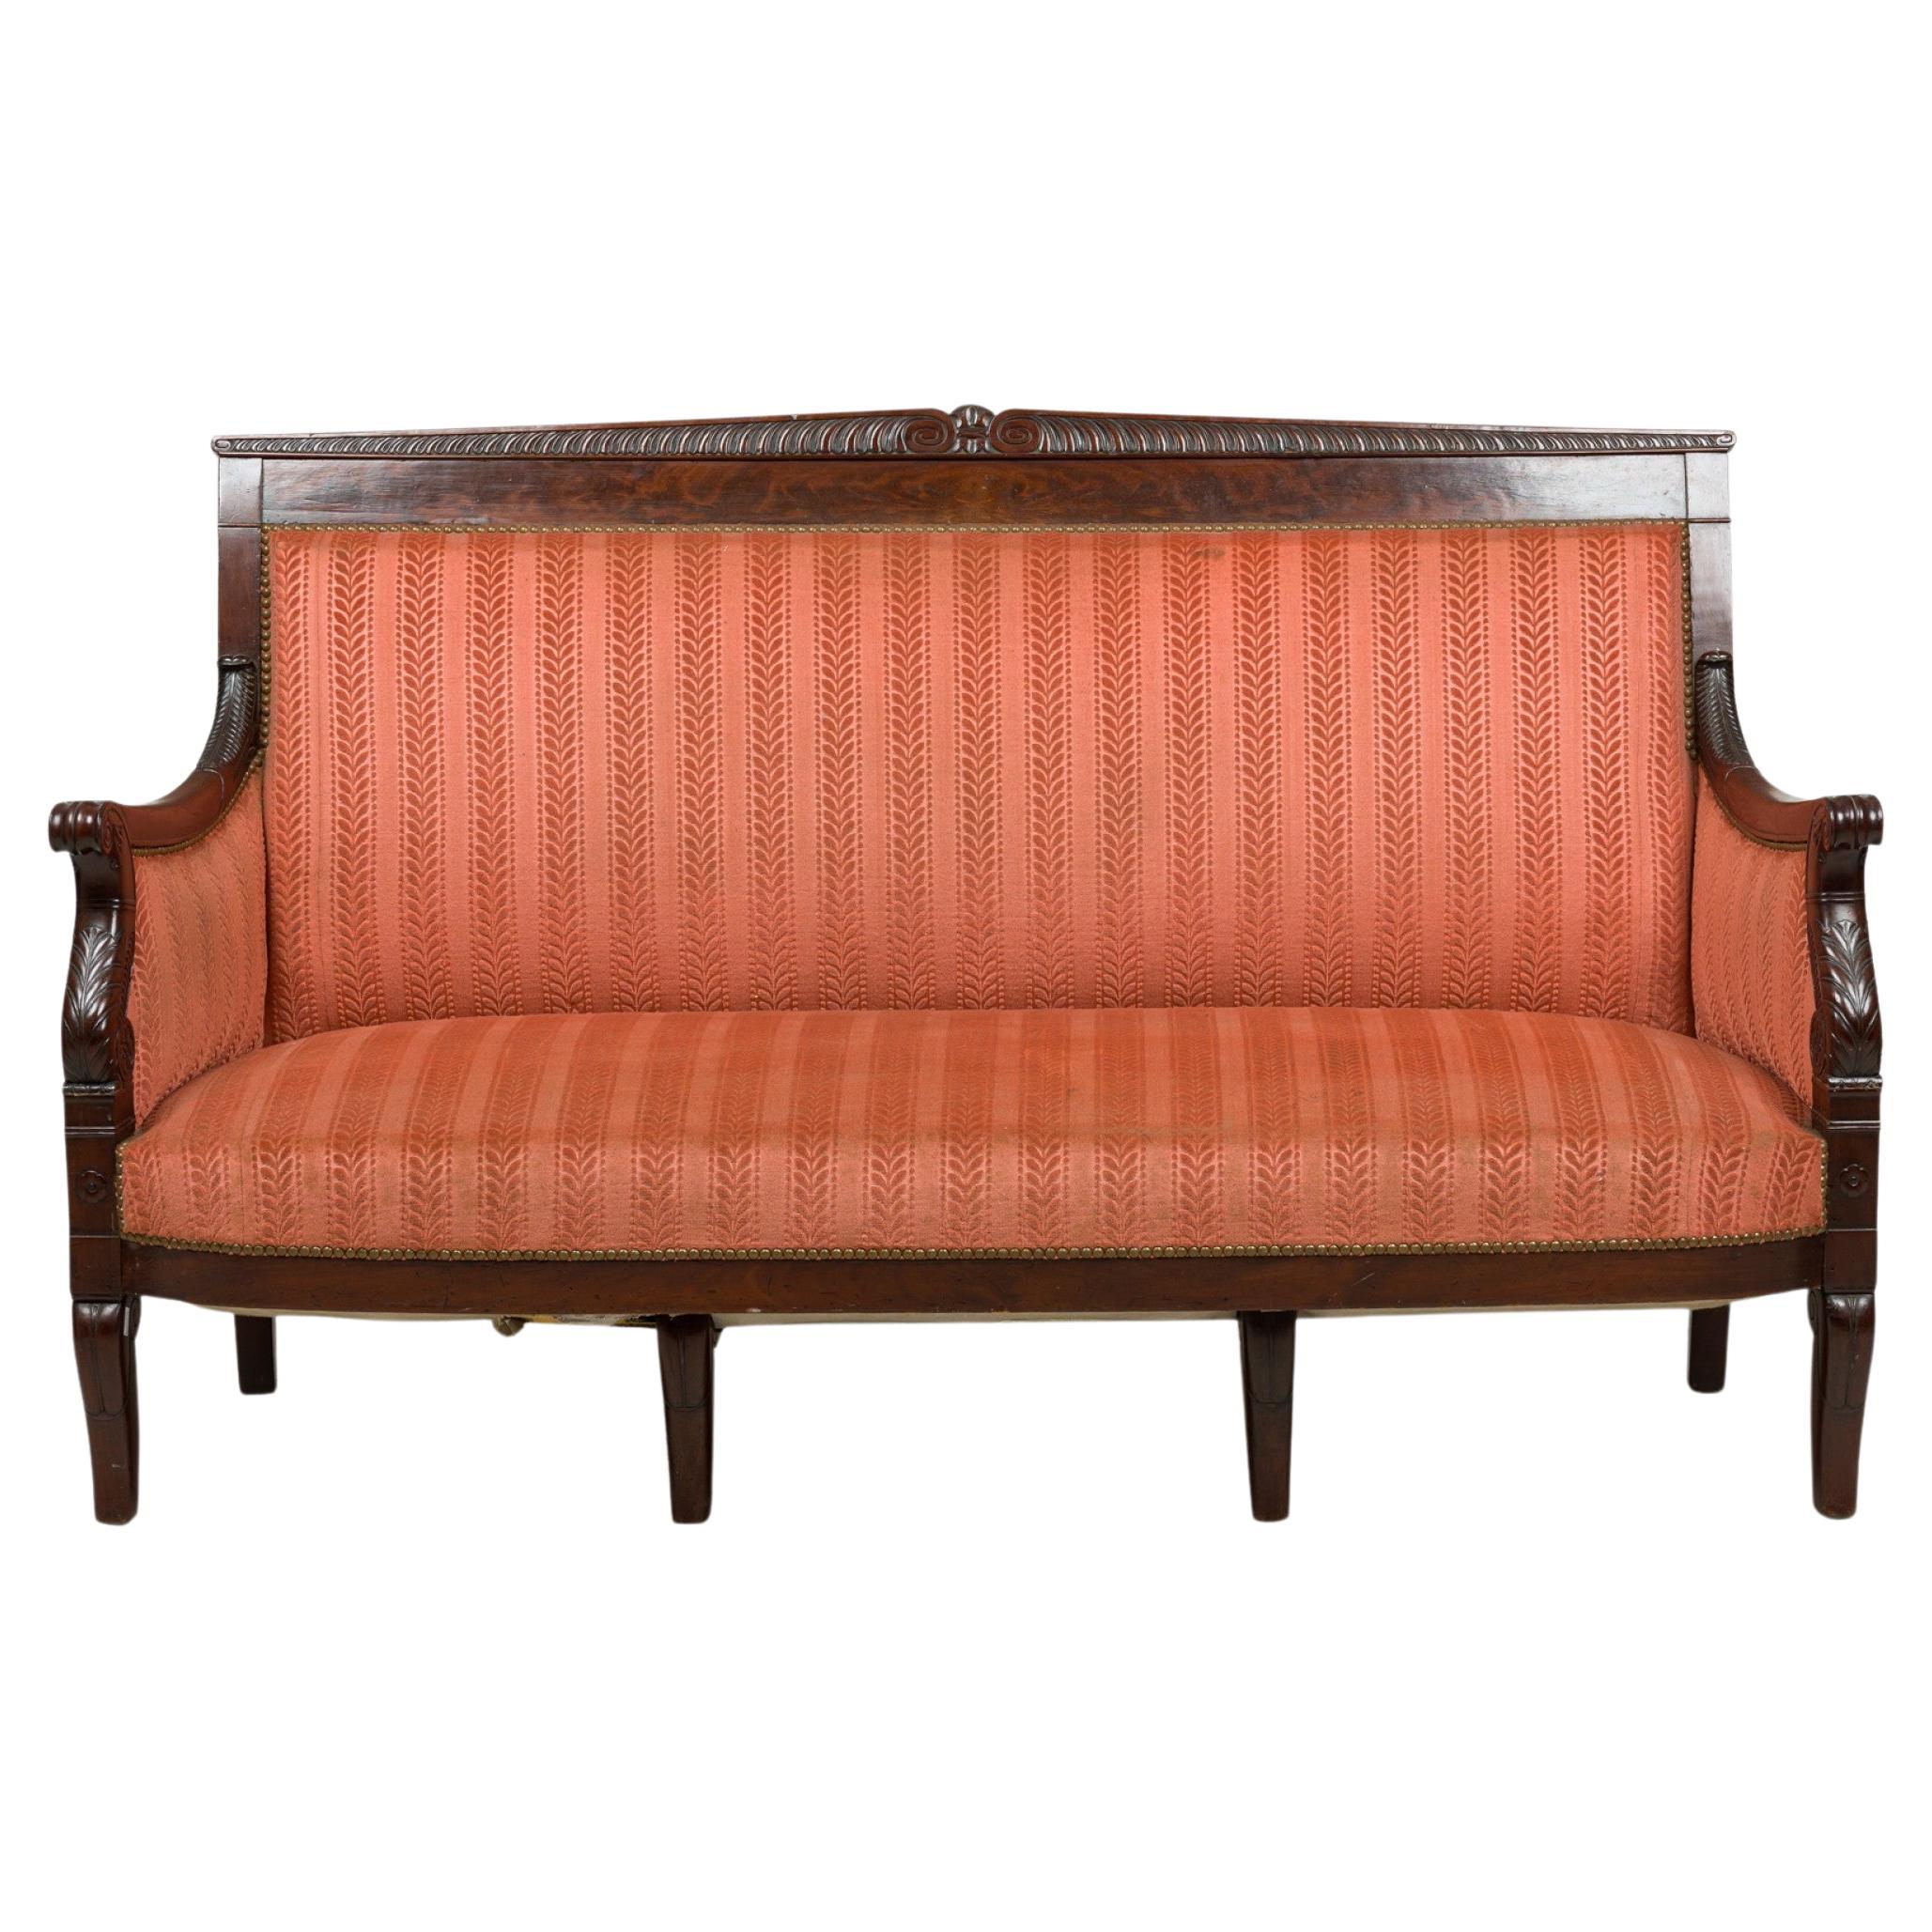 Bellanger French Empire Mahogany Pink and Red Stripe Upholstered Settee For Sale